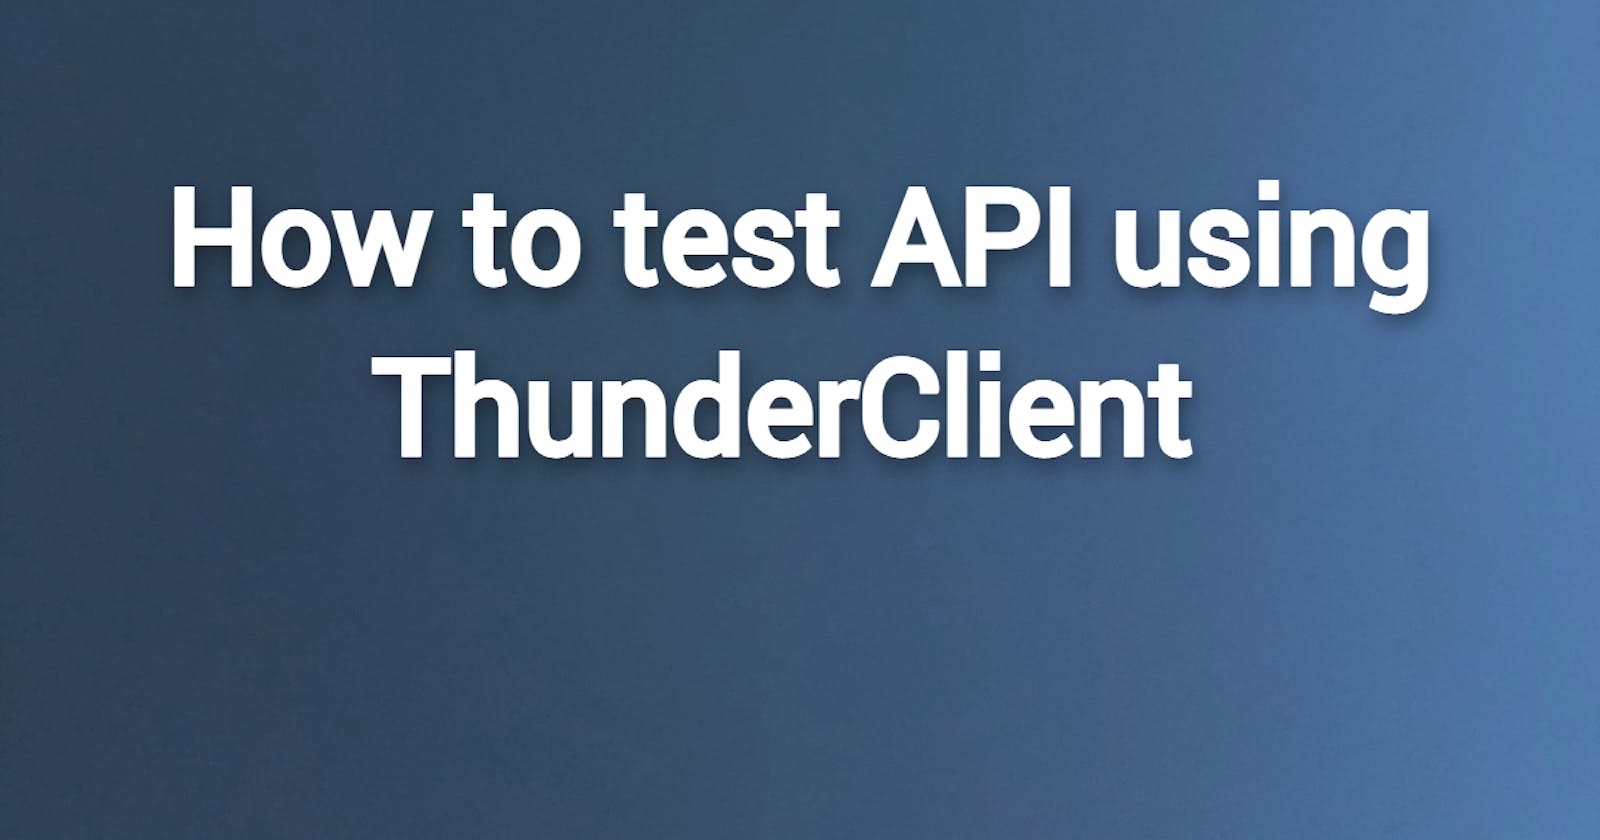 How to test API using ThunderClient